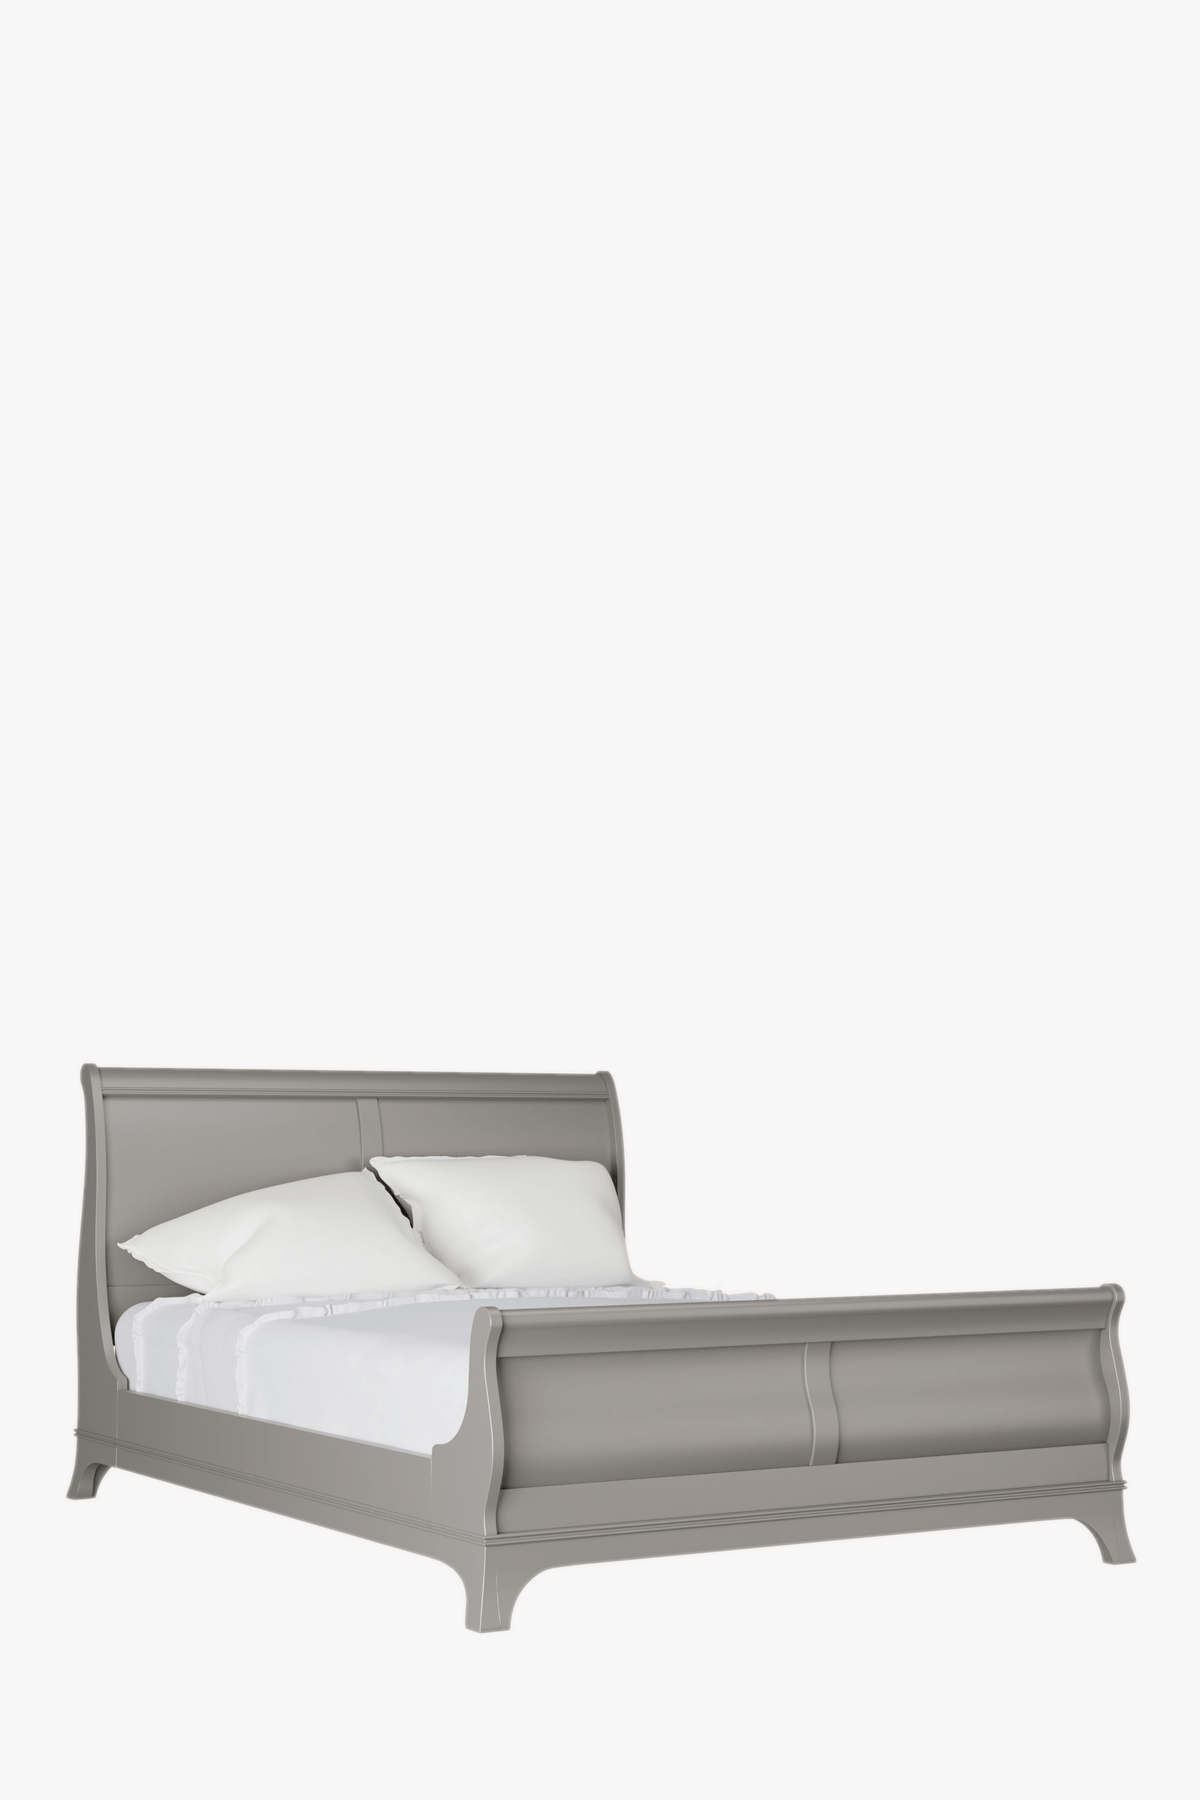 Broughton Bed Frame